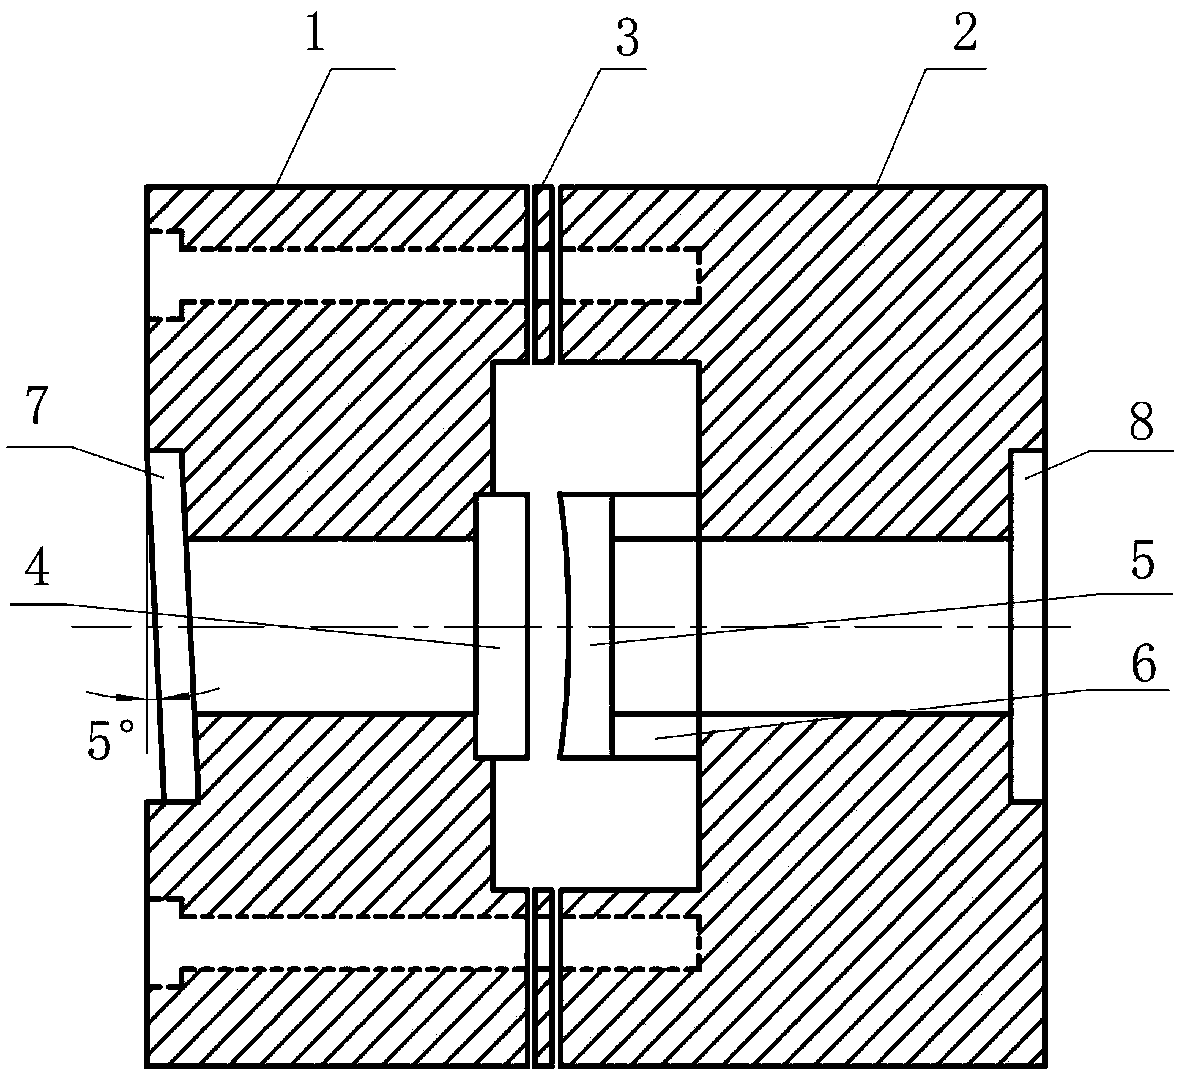 A narrowband optical frequency filter device